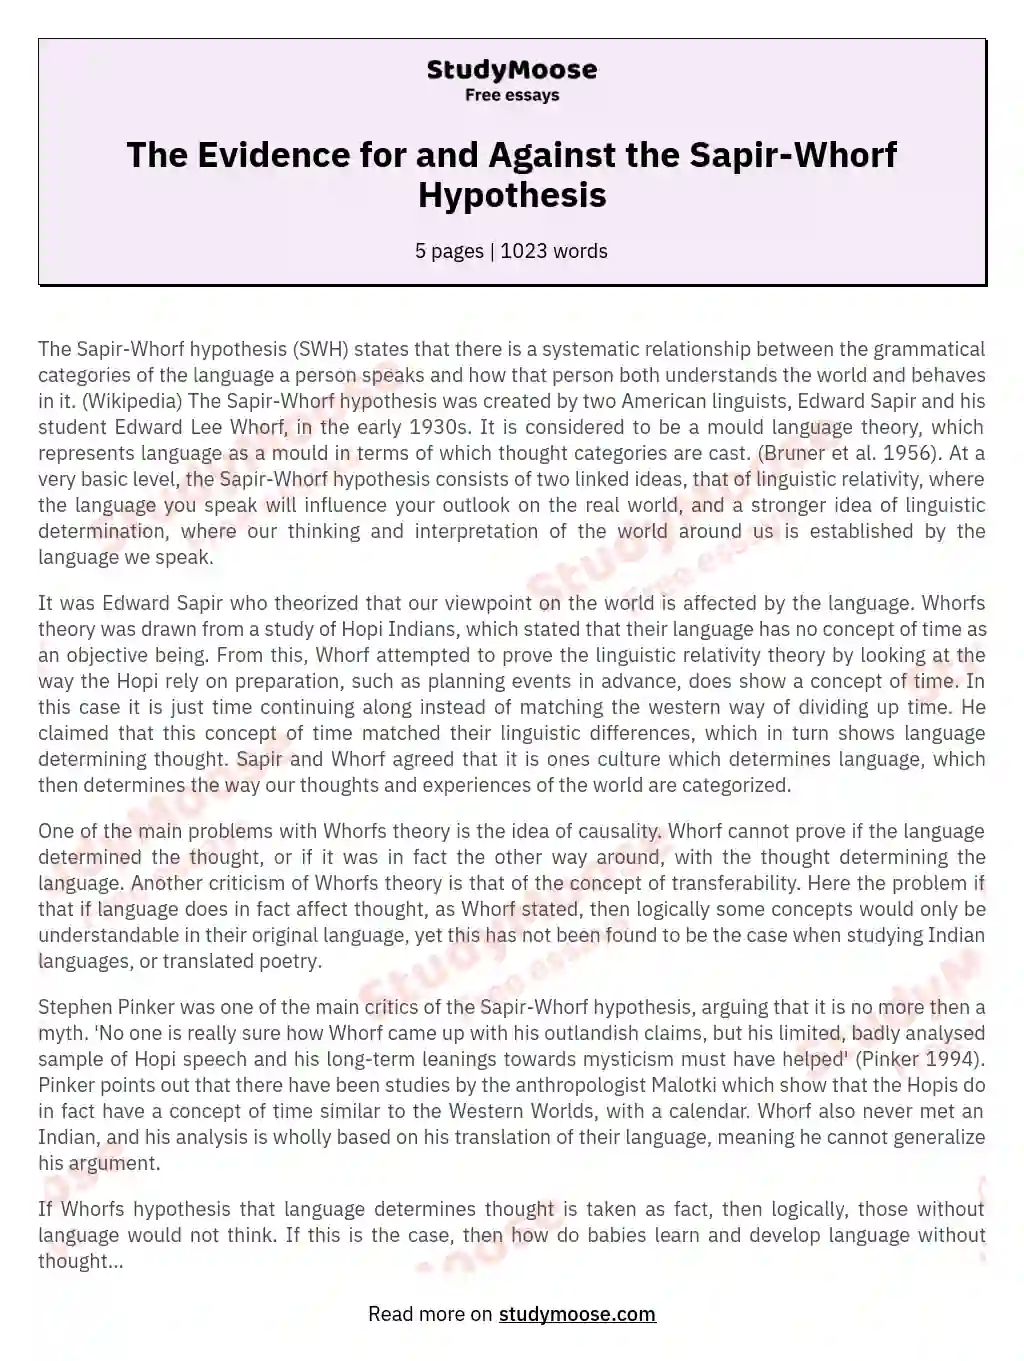 The Evidence for and Against the Sapir-Whorf Hypothesis essay